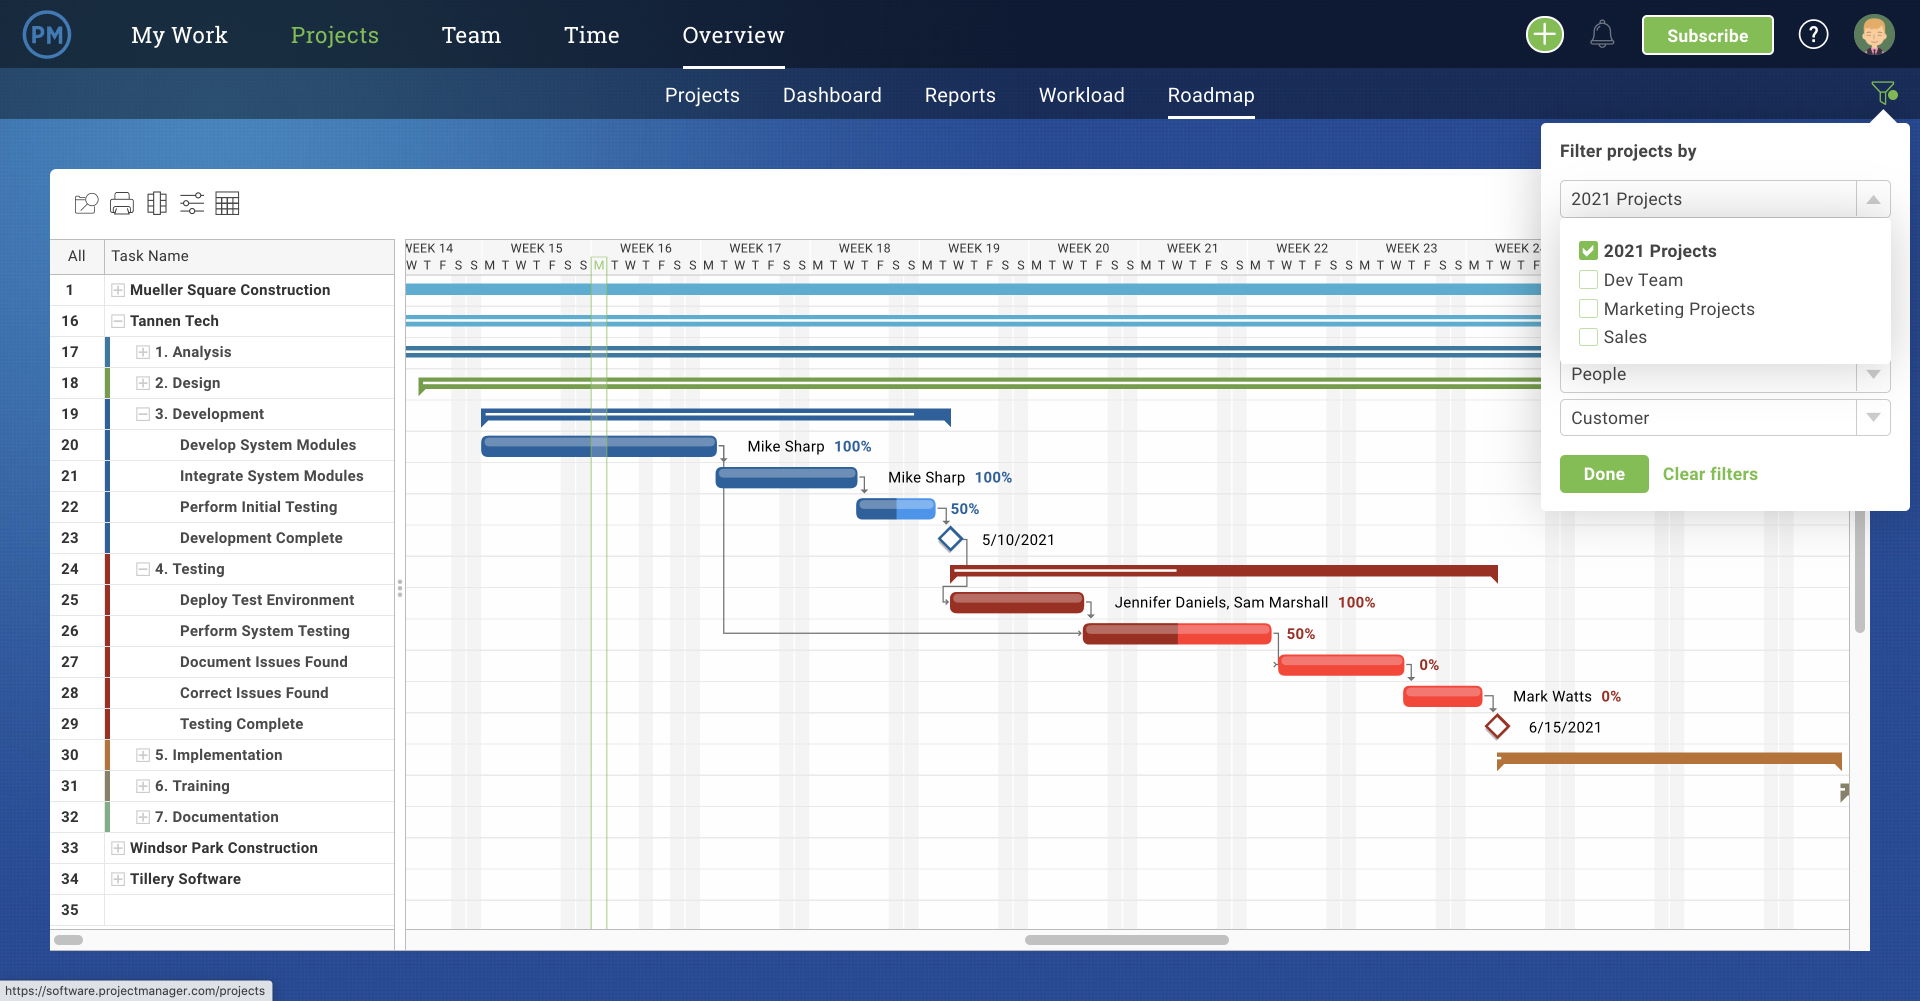 project roadmap for project portfolio management in ProjectManager.com, showing tasks and their durations on a timeline.